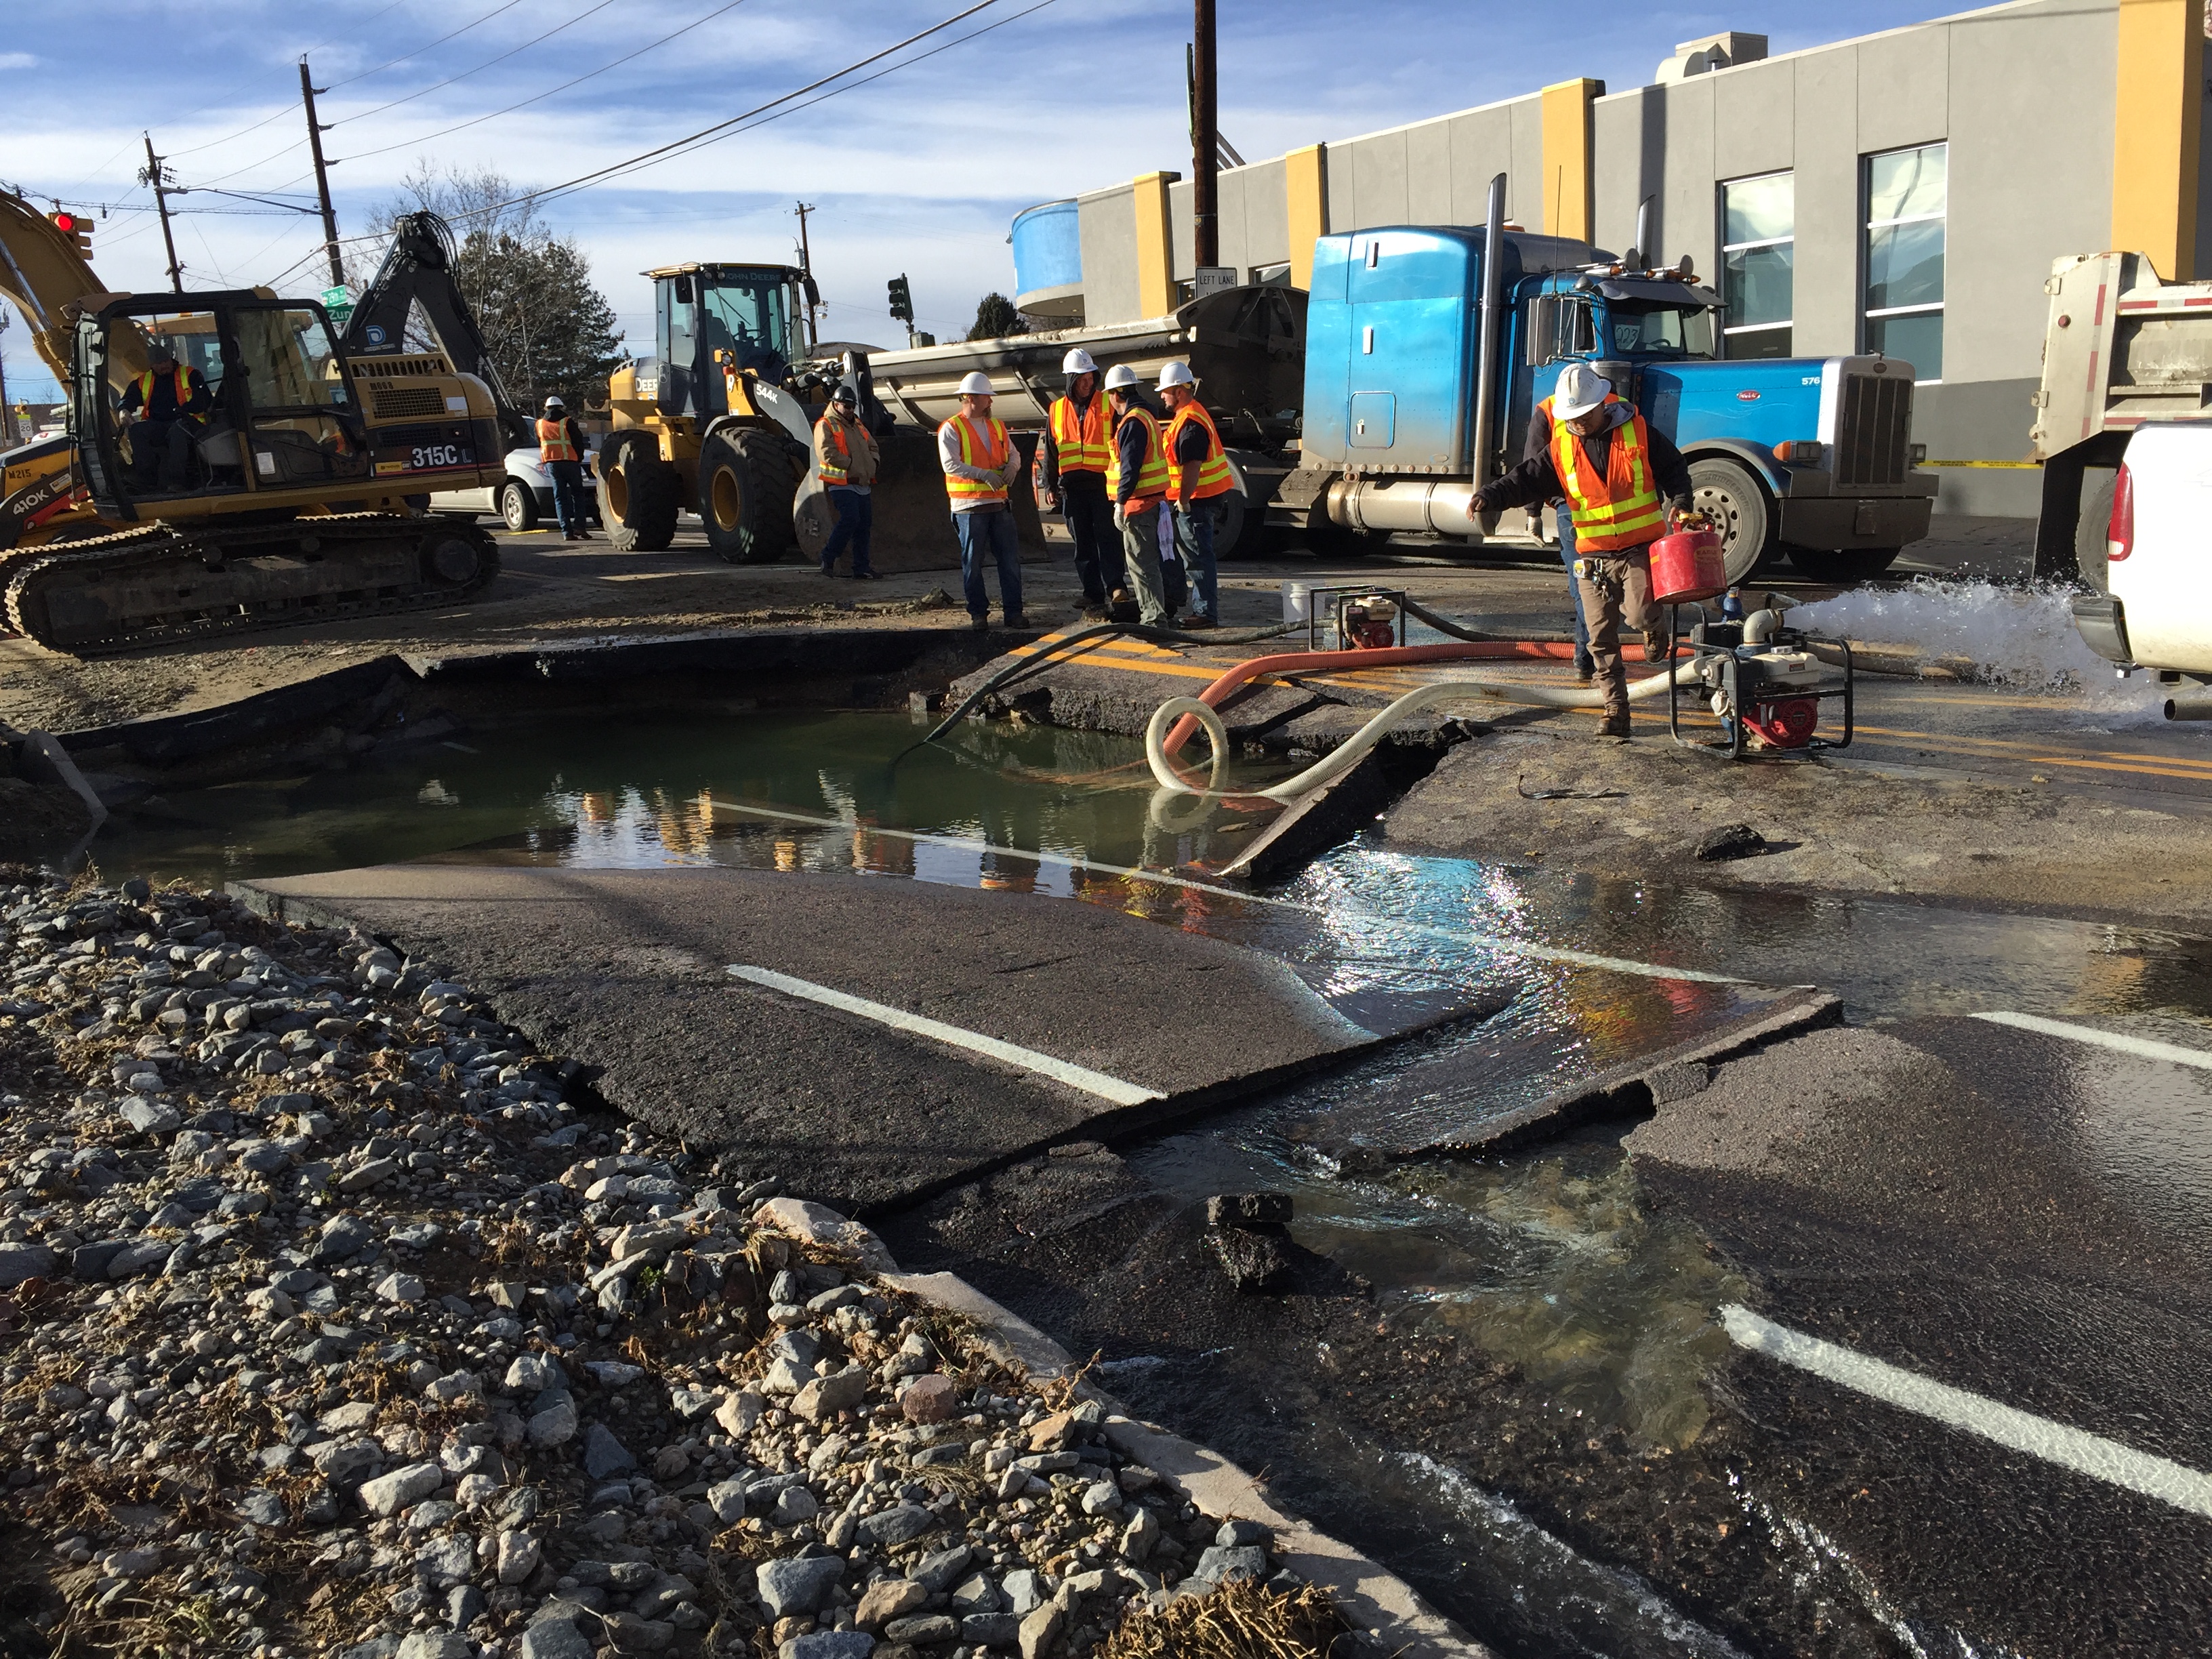 Crew draining water from hole after main break.